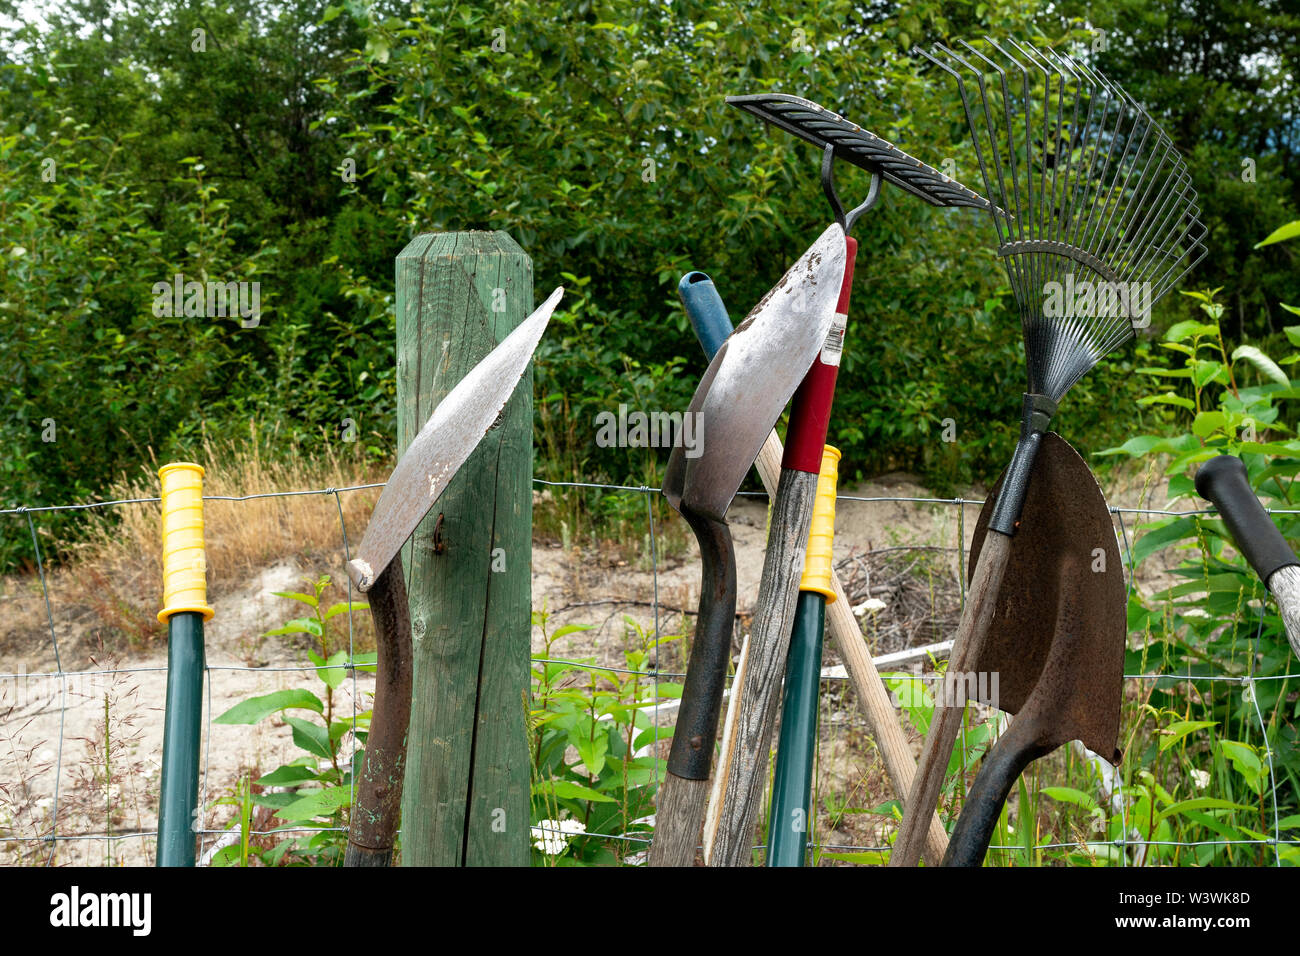 Tools are lined up along a fence to be used in a backyard vegetable garden. Stock Photo